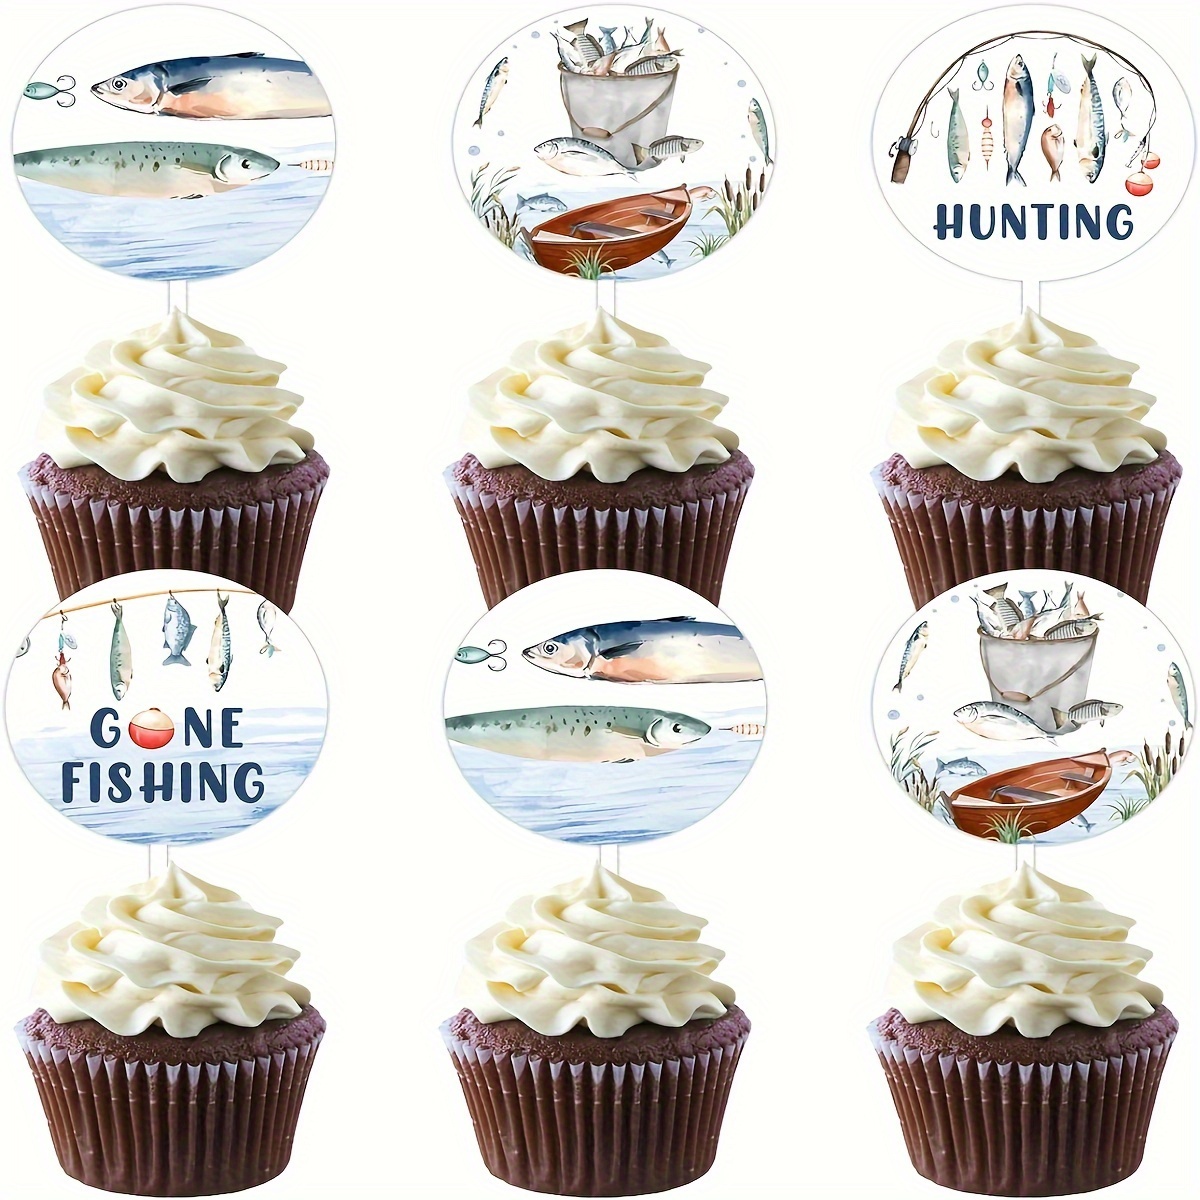 36pcs, Fishing Cupcake Toppers - Fishing Birthday Cake Toppers